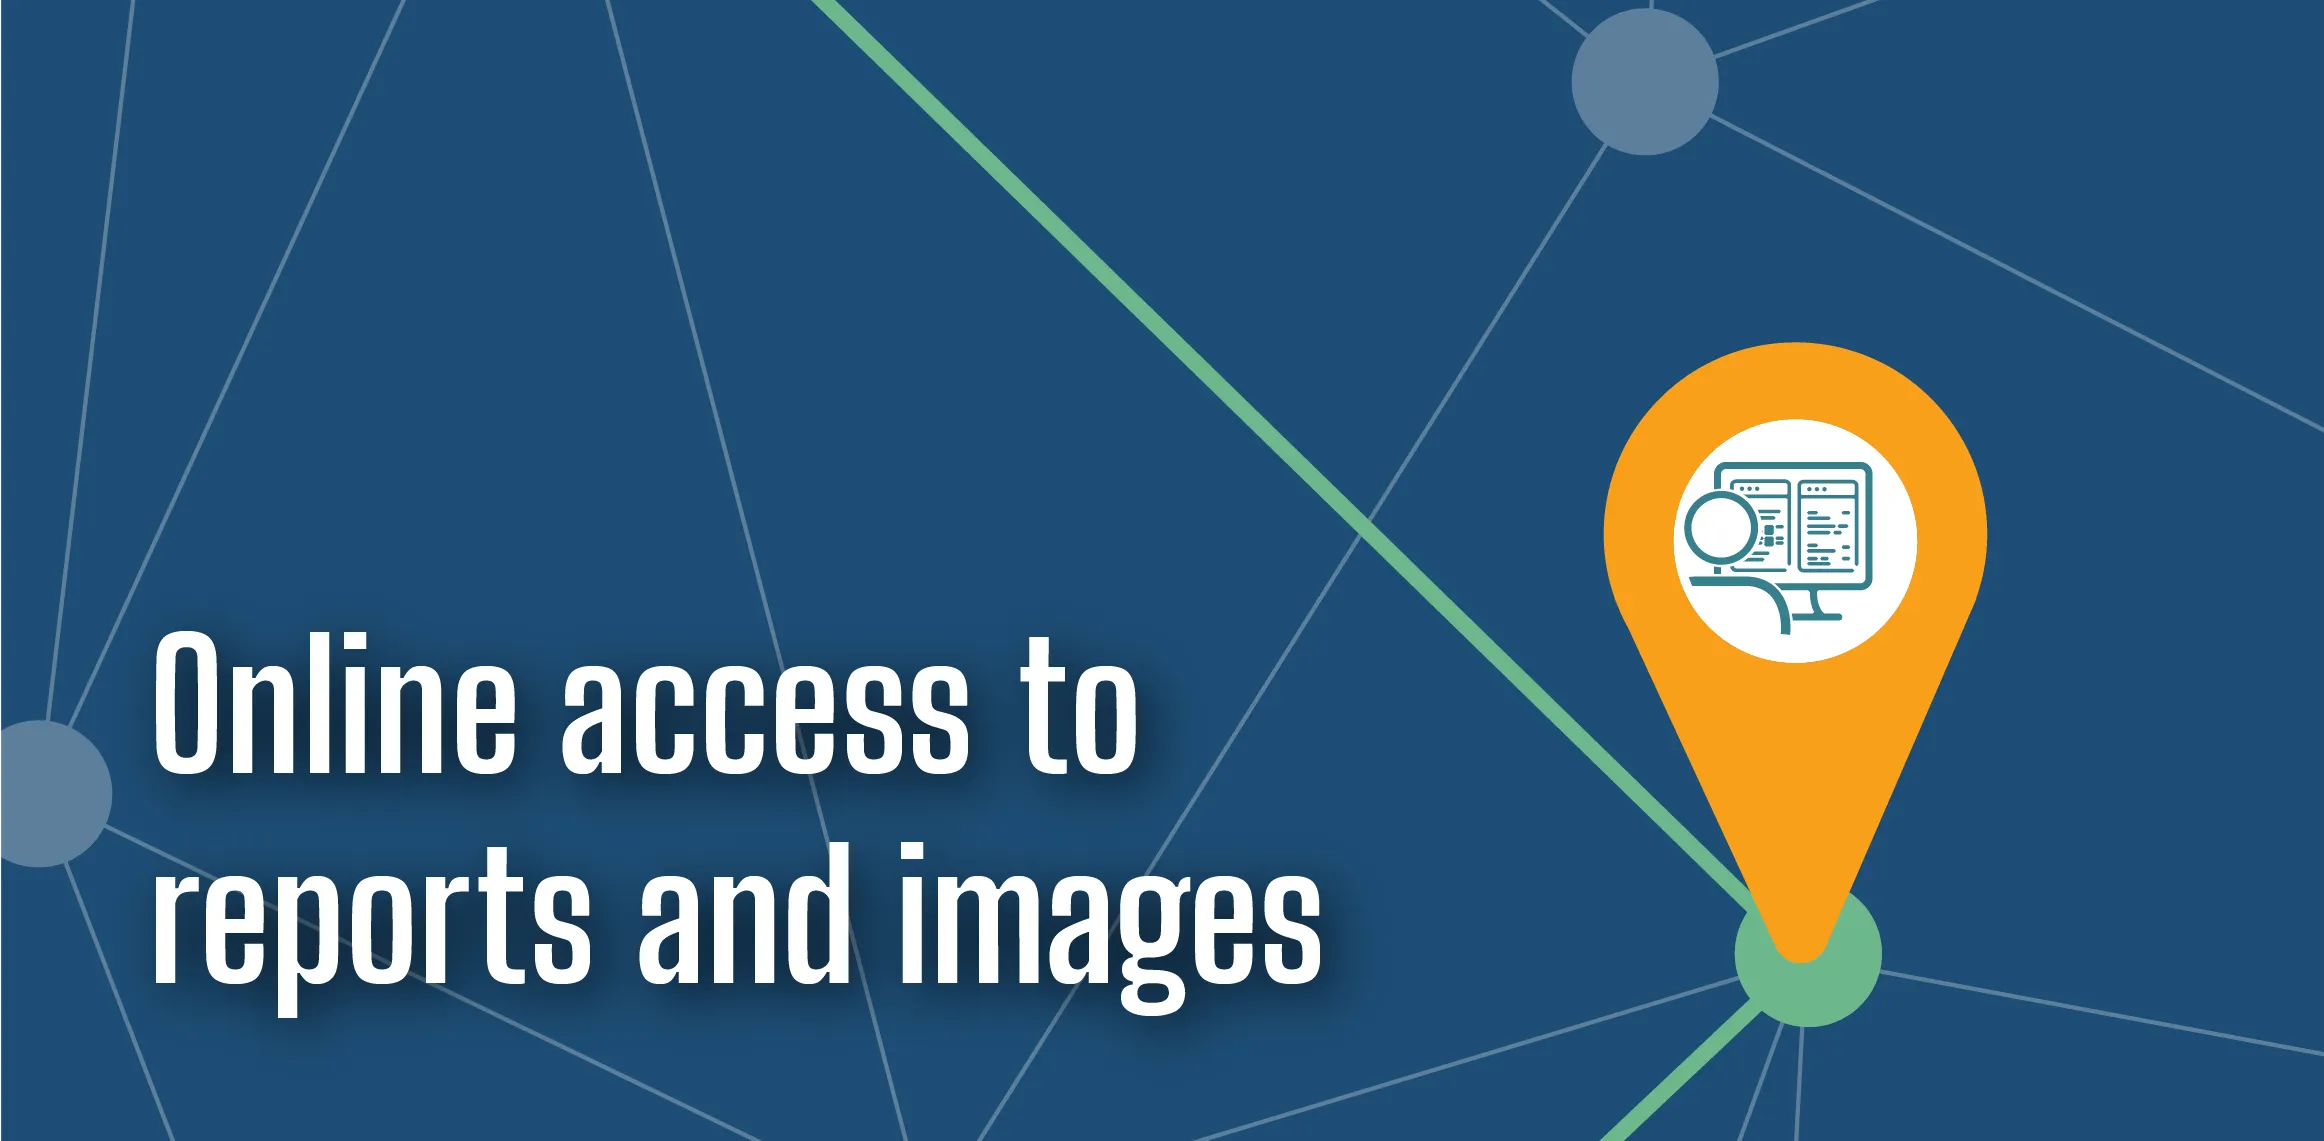 Online access to reports and images